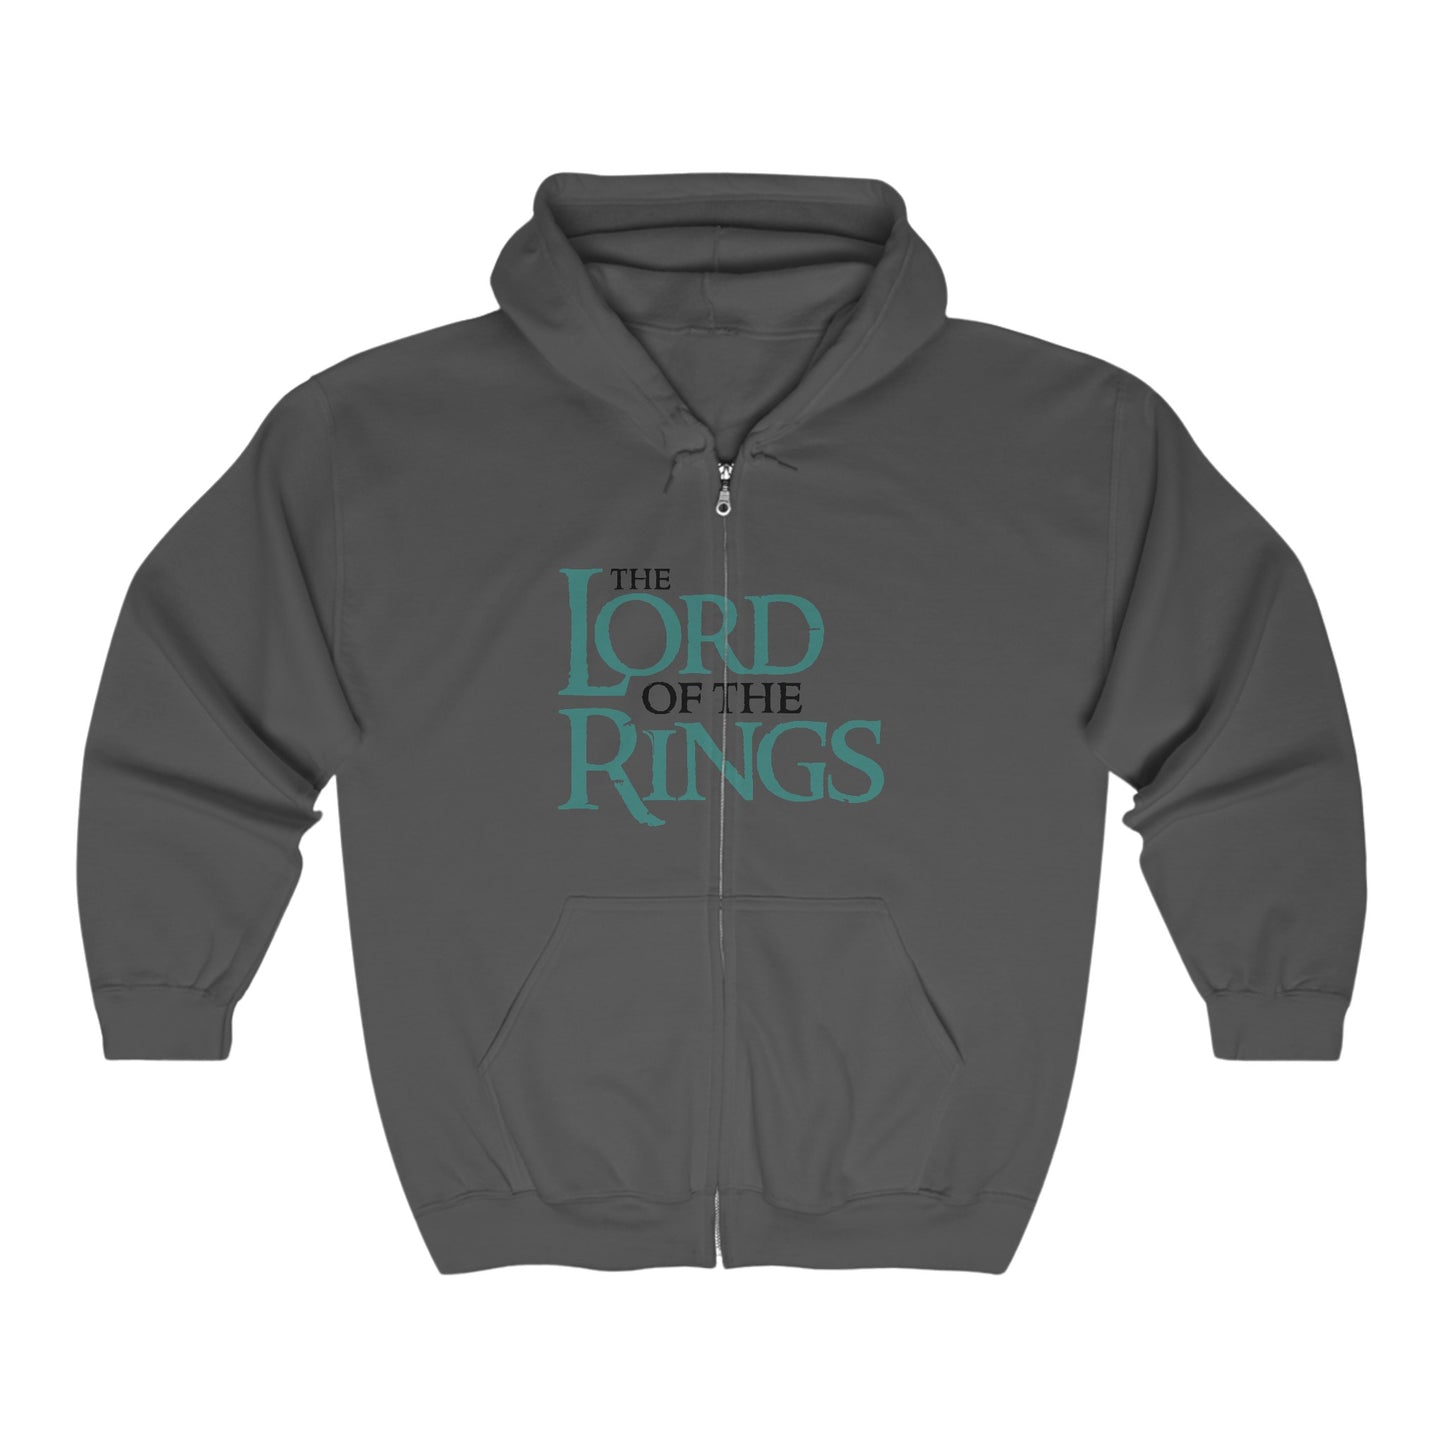 The Lord Of The Rings Zip-Up Hoodie